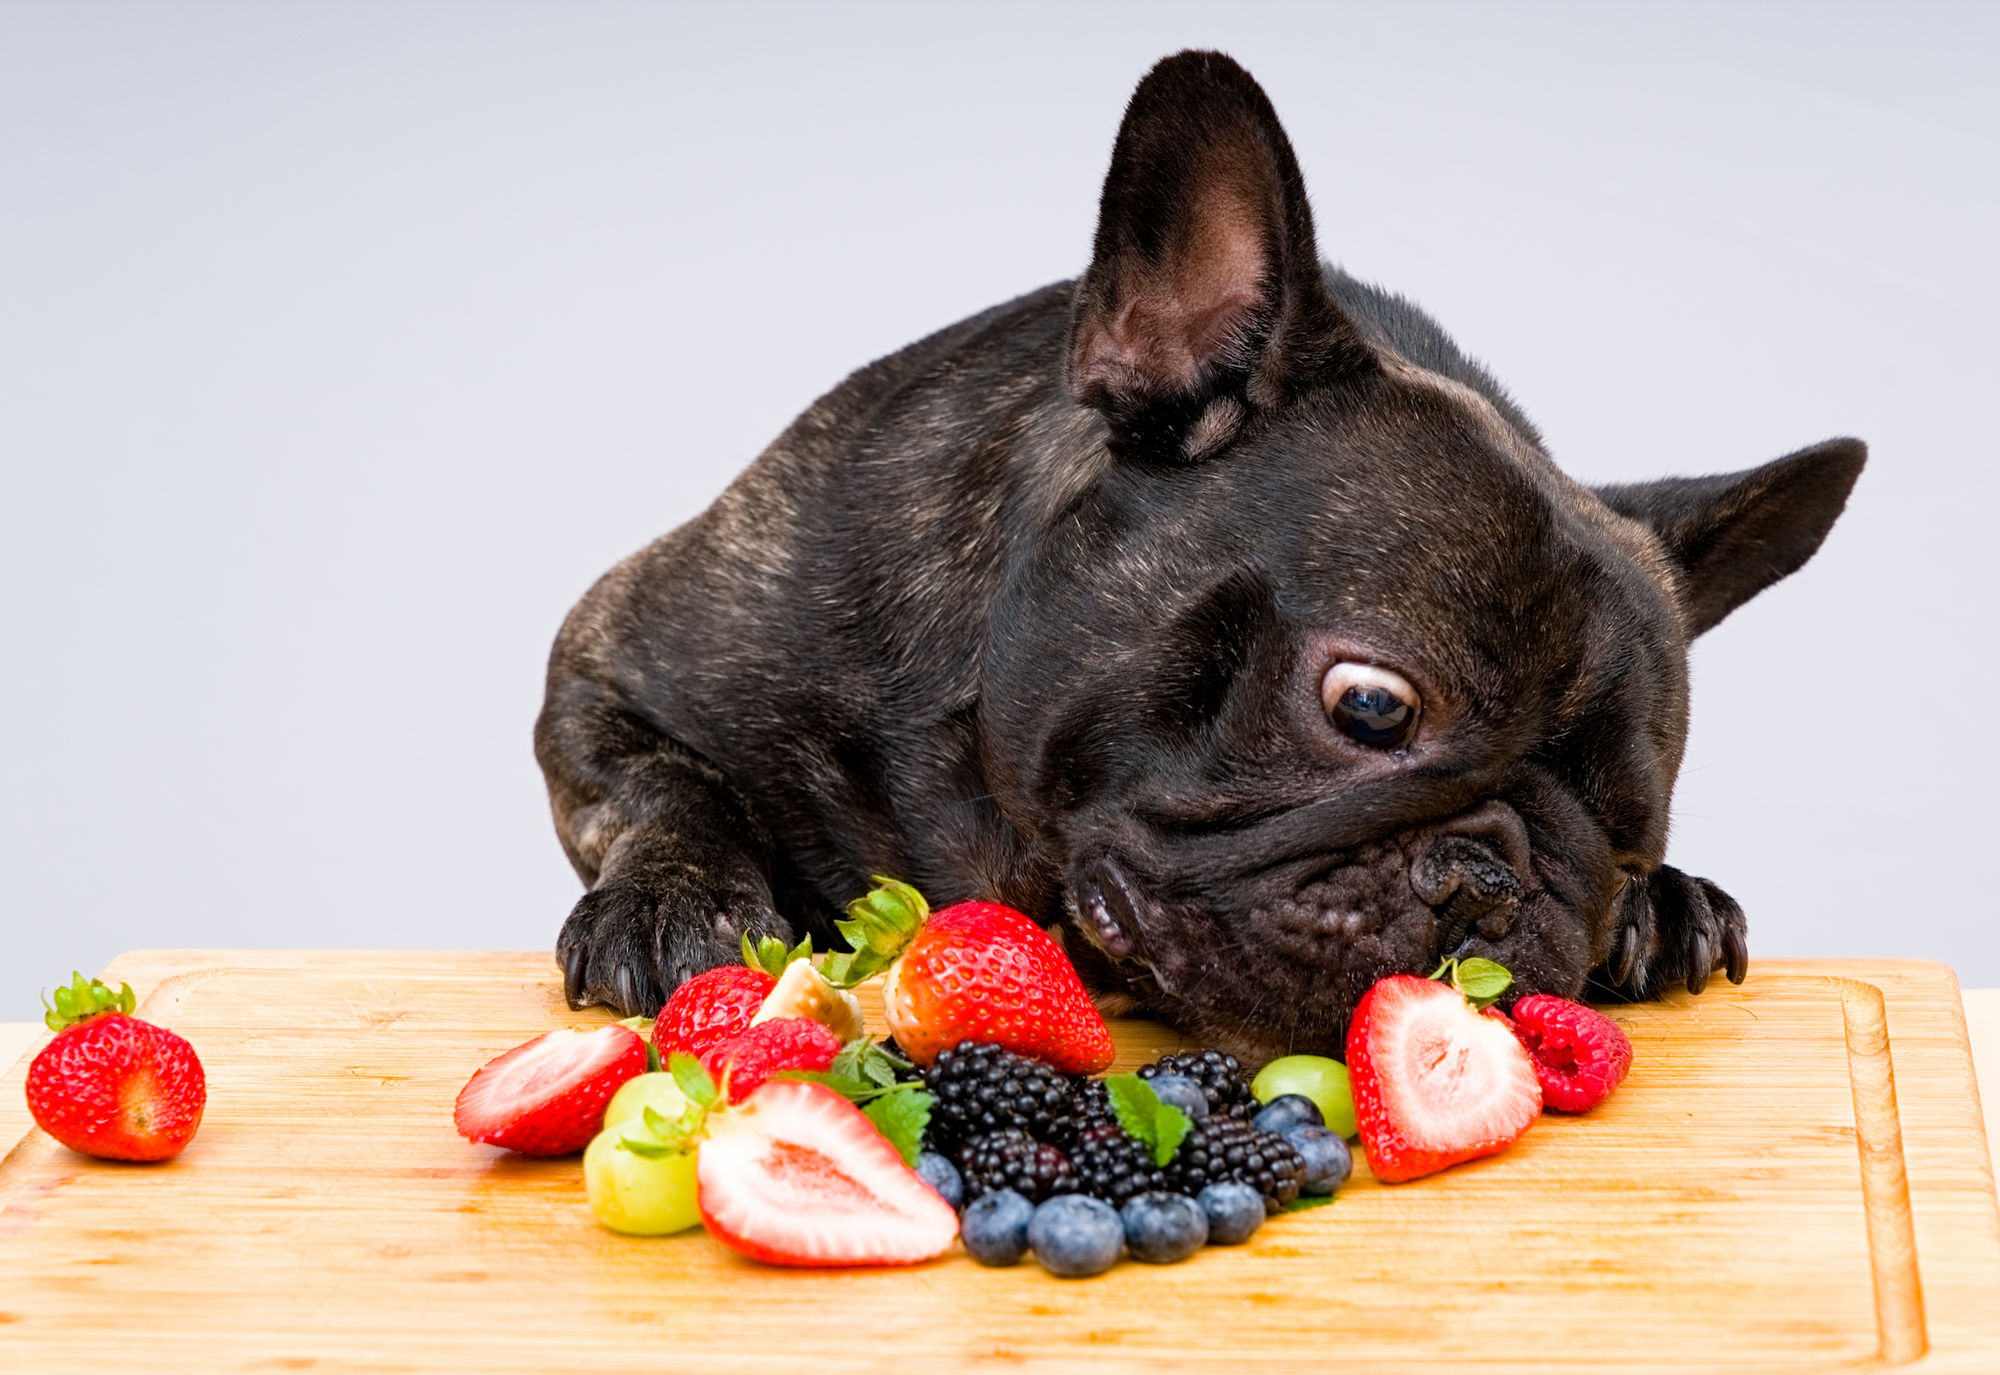 French bulldog lying on table with fruits and strawberries.